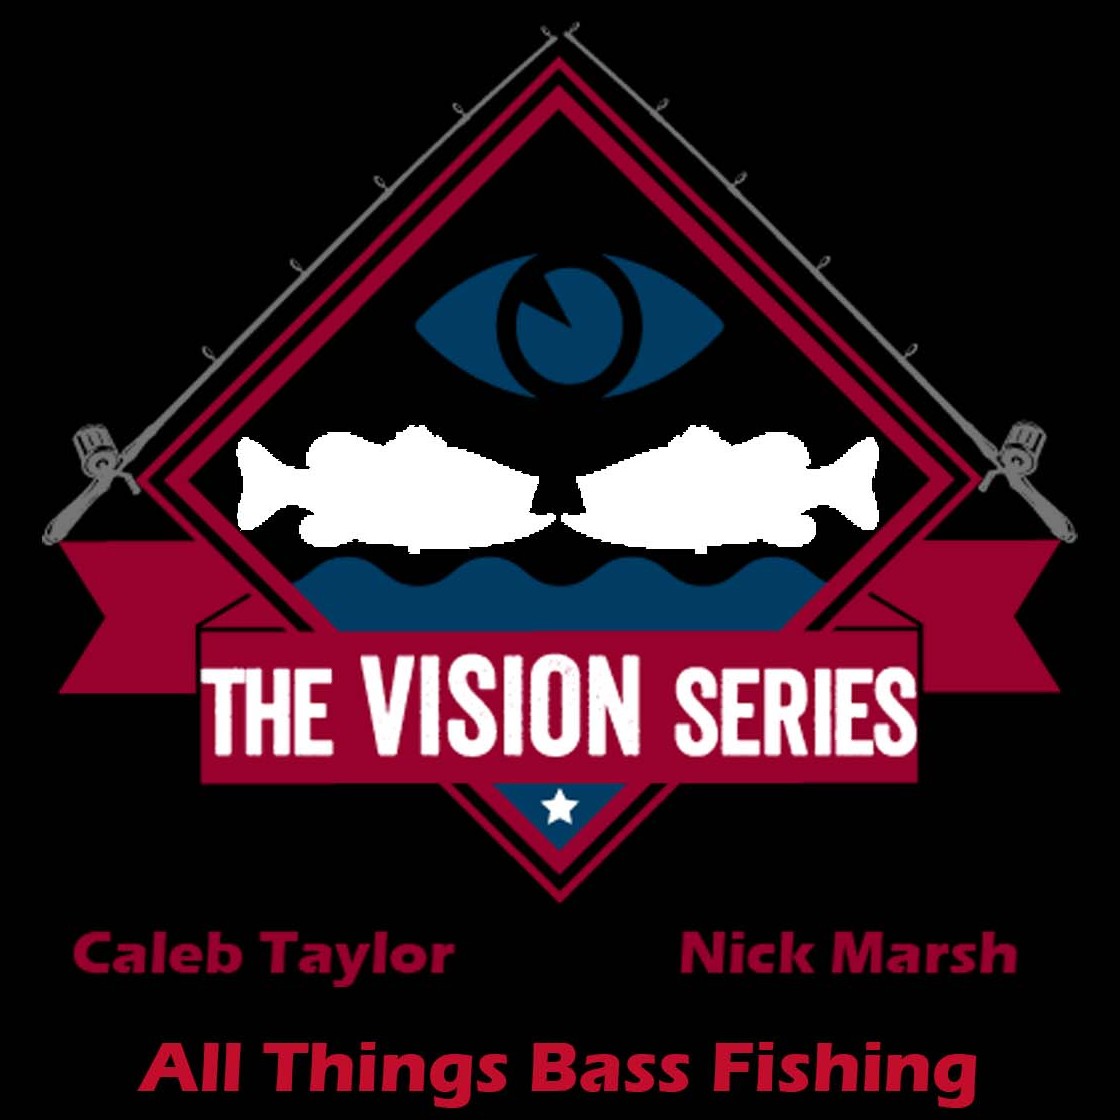 The Vision Series: All Things Bass Fishing